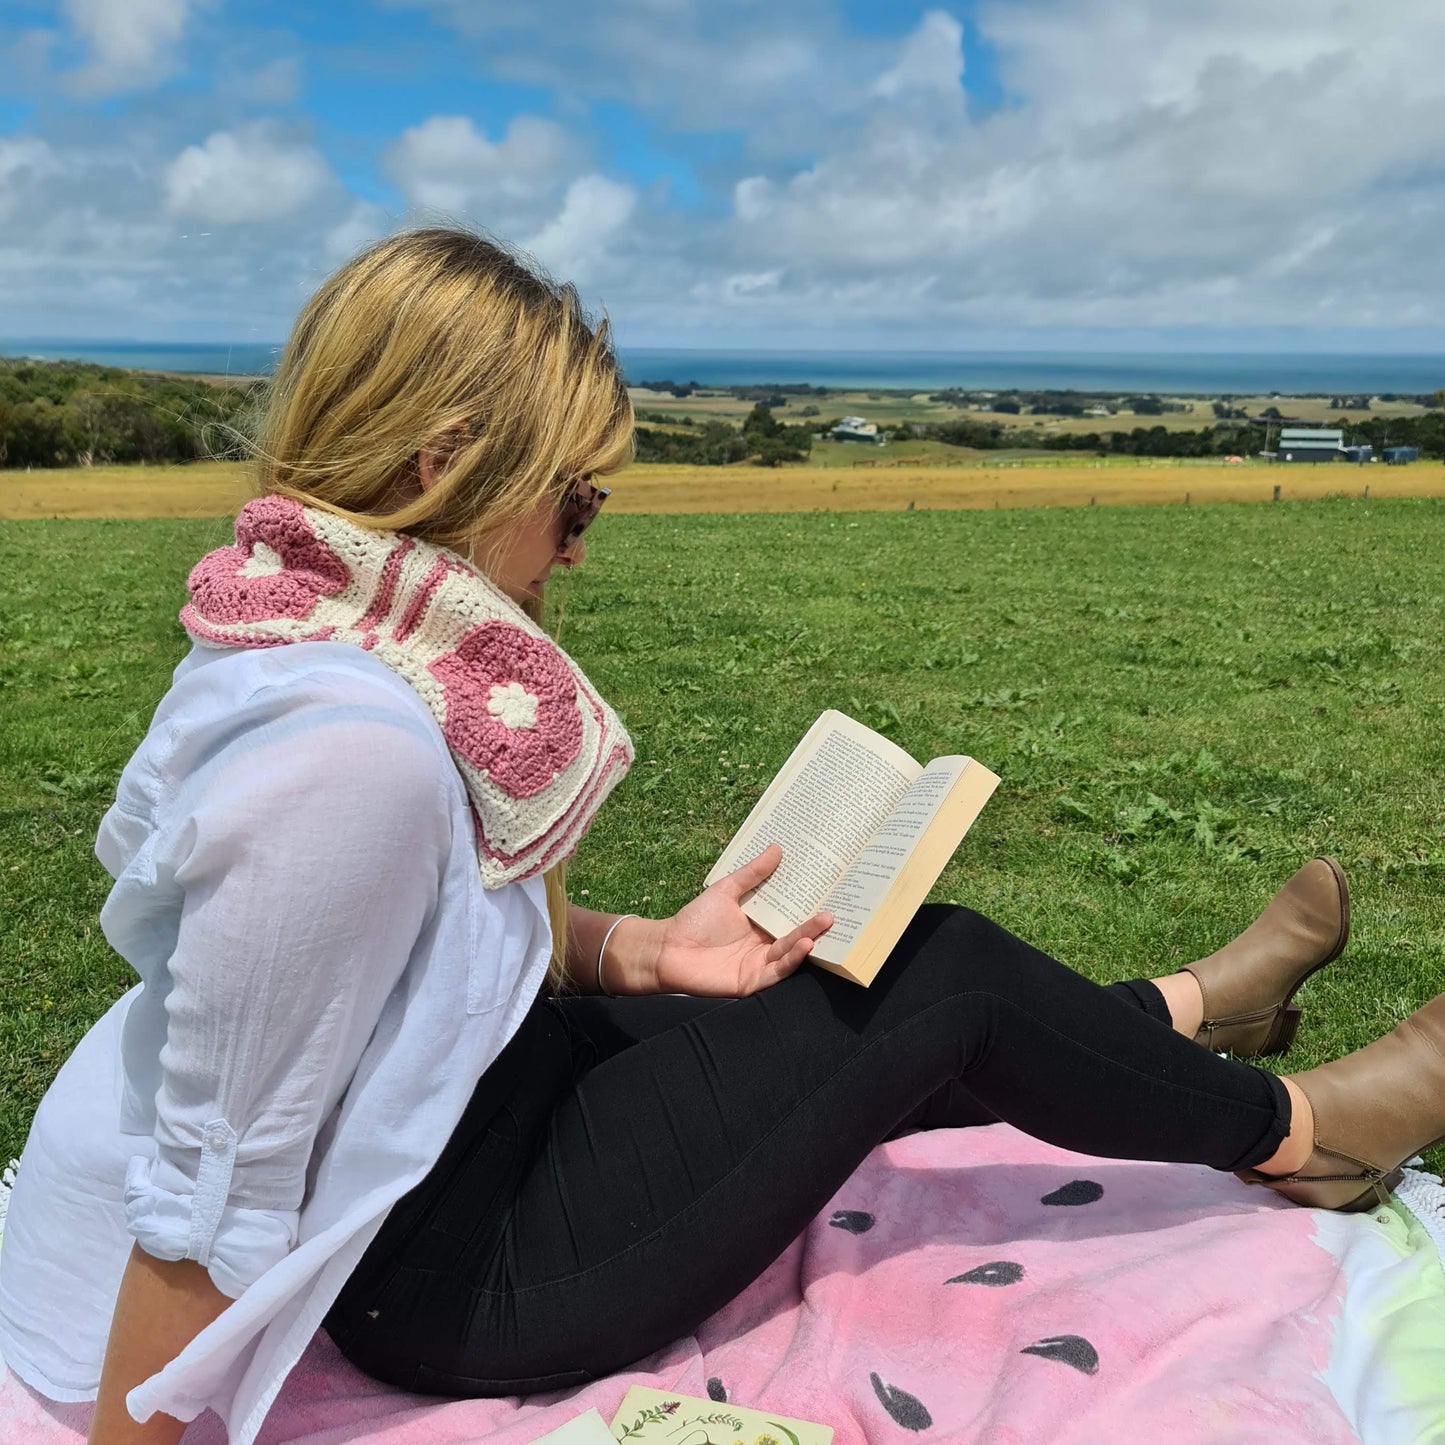 Iris Cowl in pink and cream by Shelley Husband being worn by a blonde woman reading in a paddock